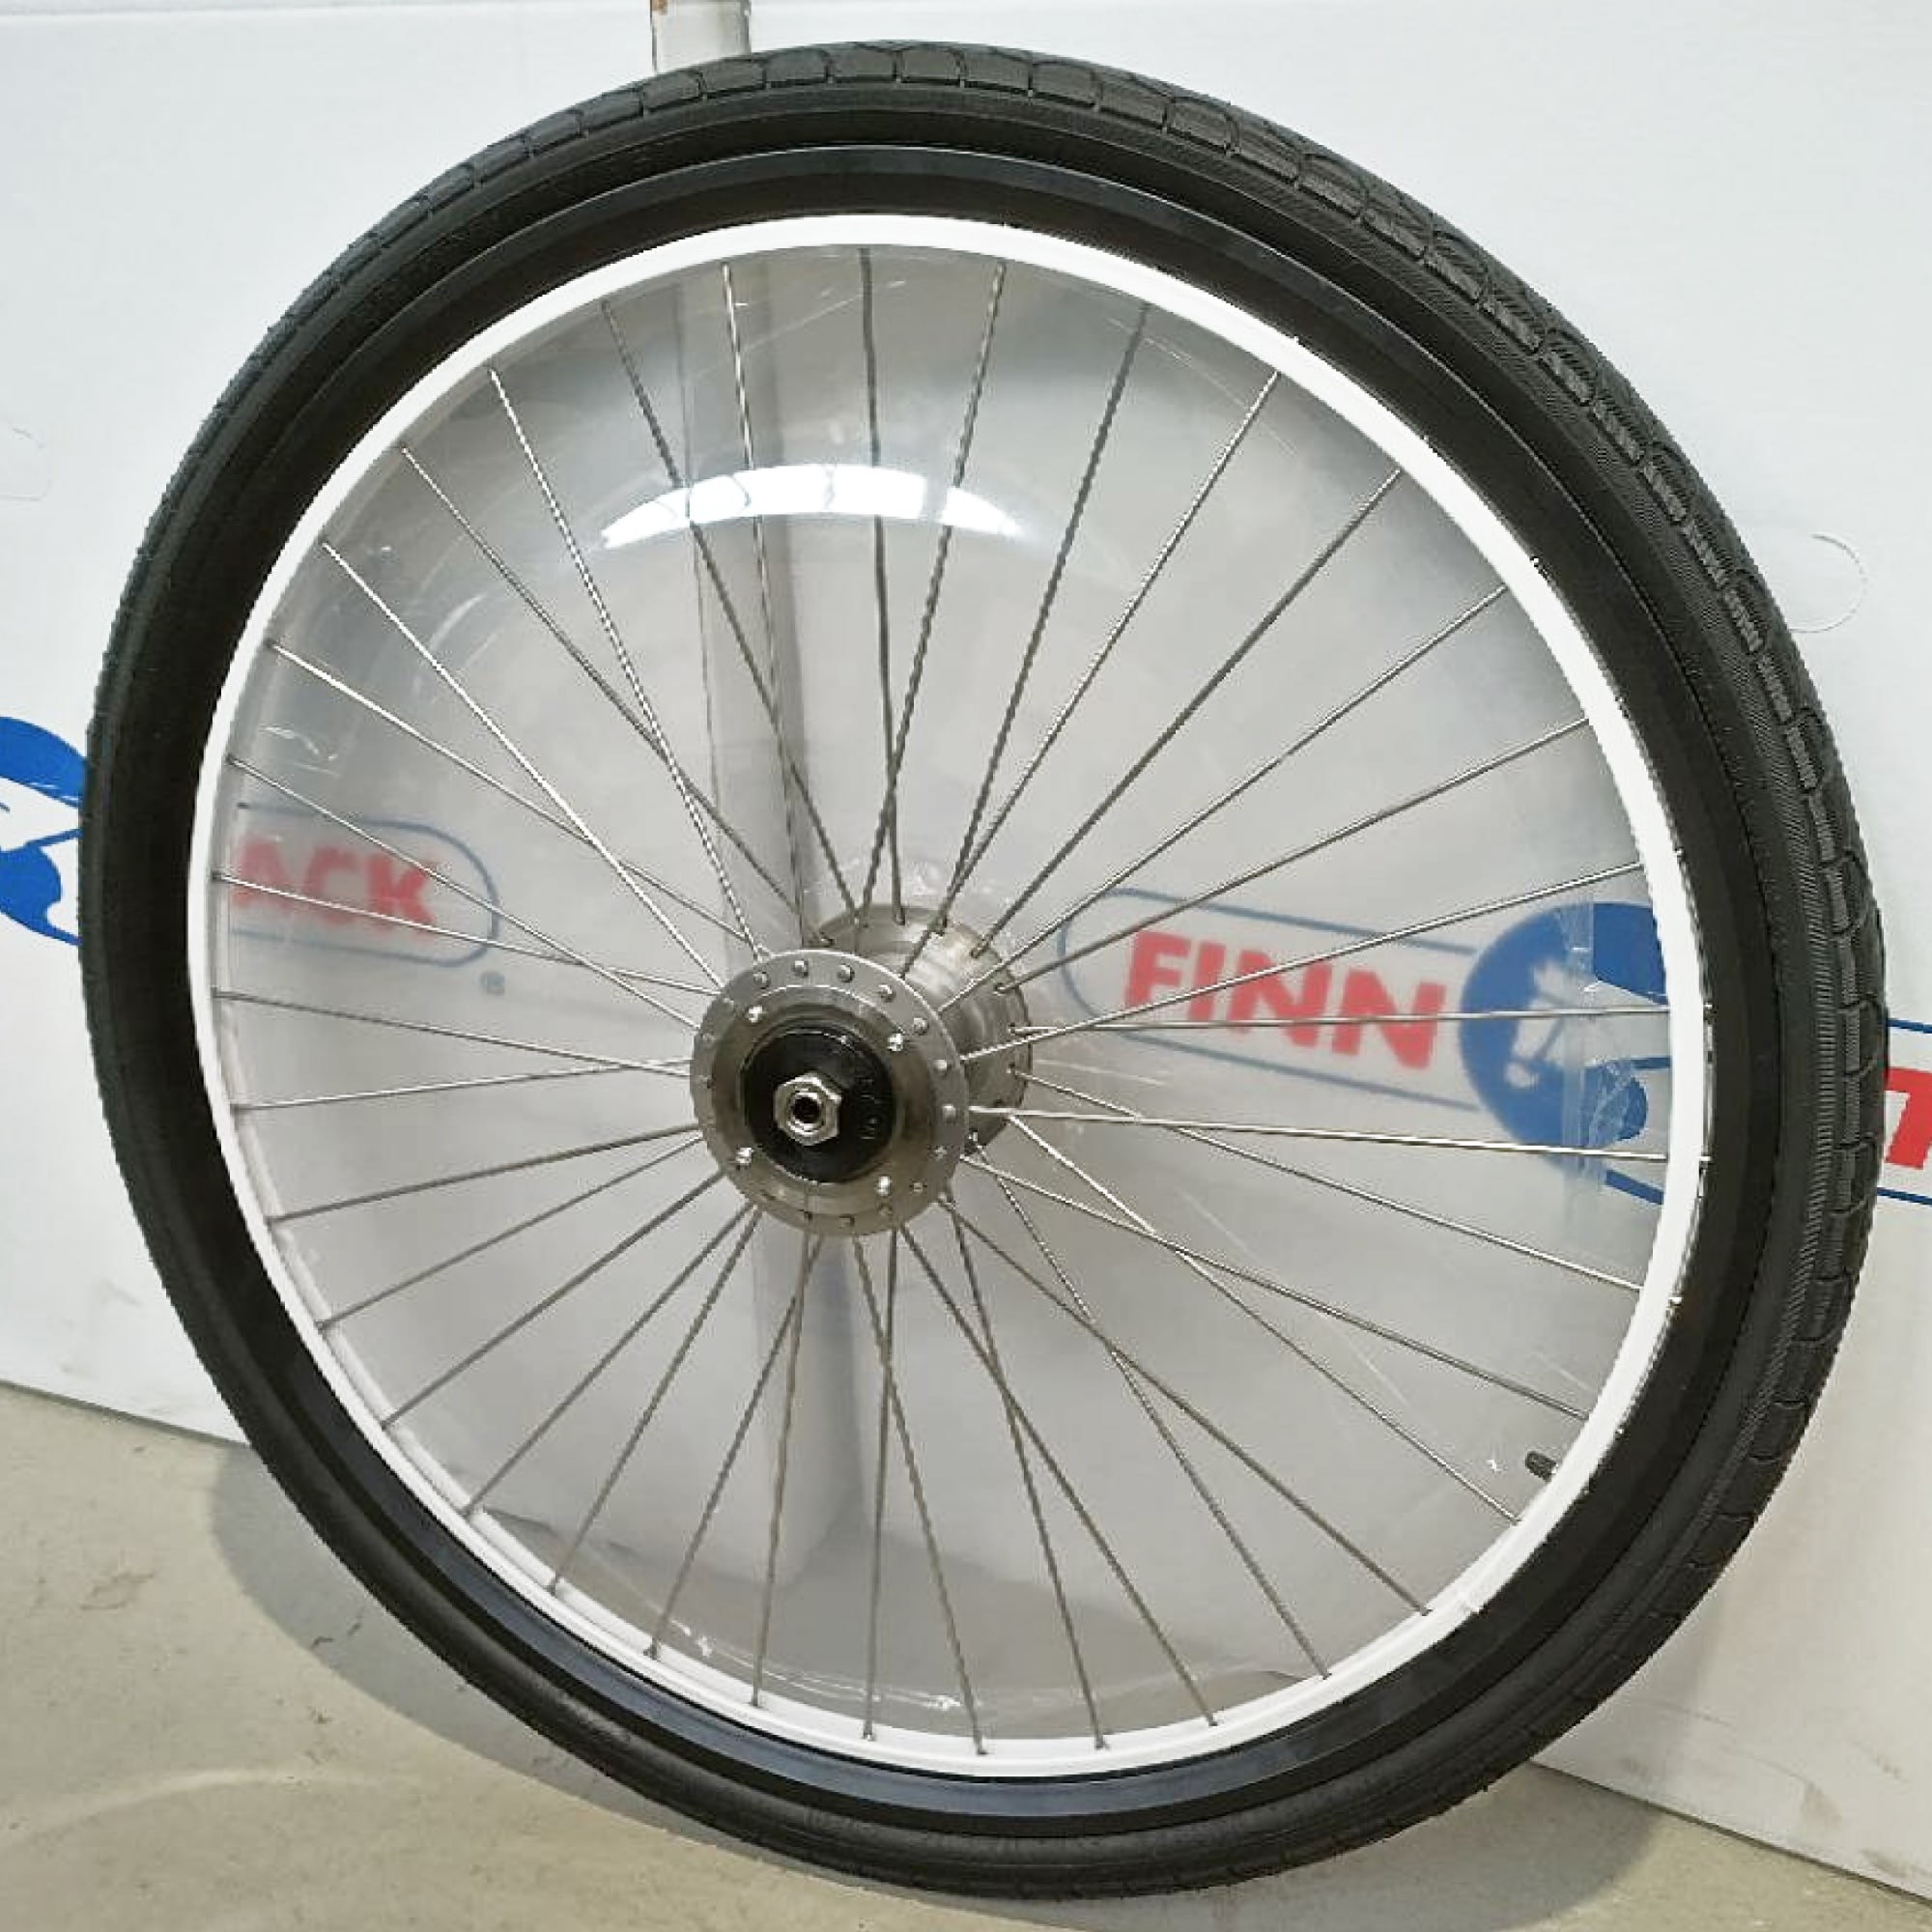 Finntack Sulky wheel 28" w/ pvc covers (sold in pairs)